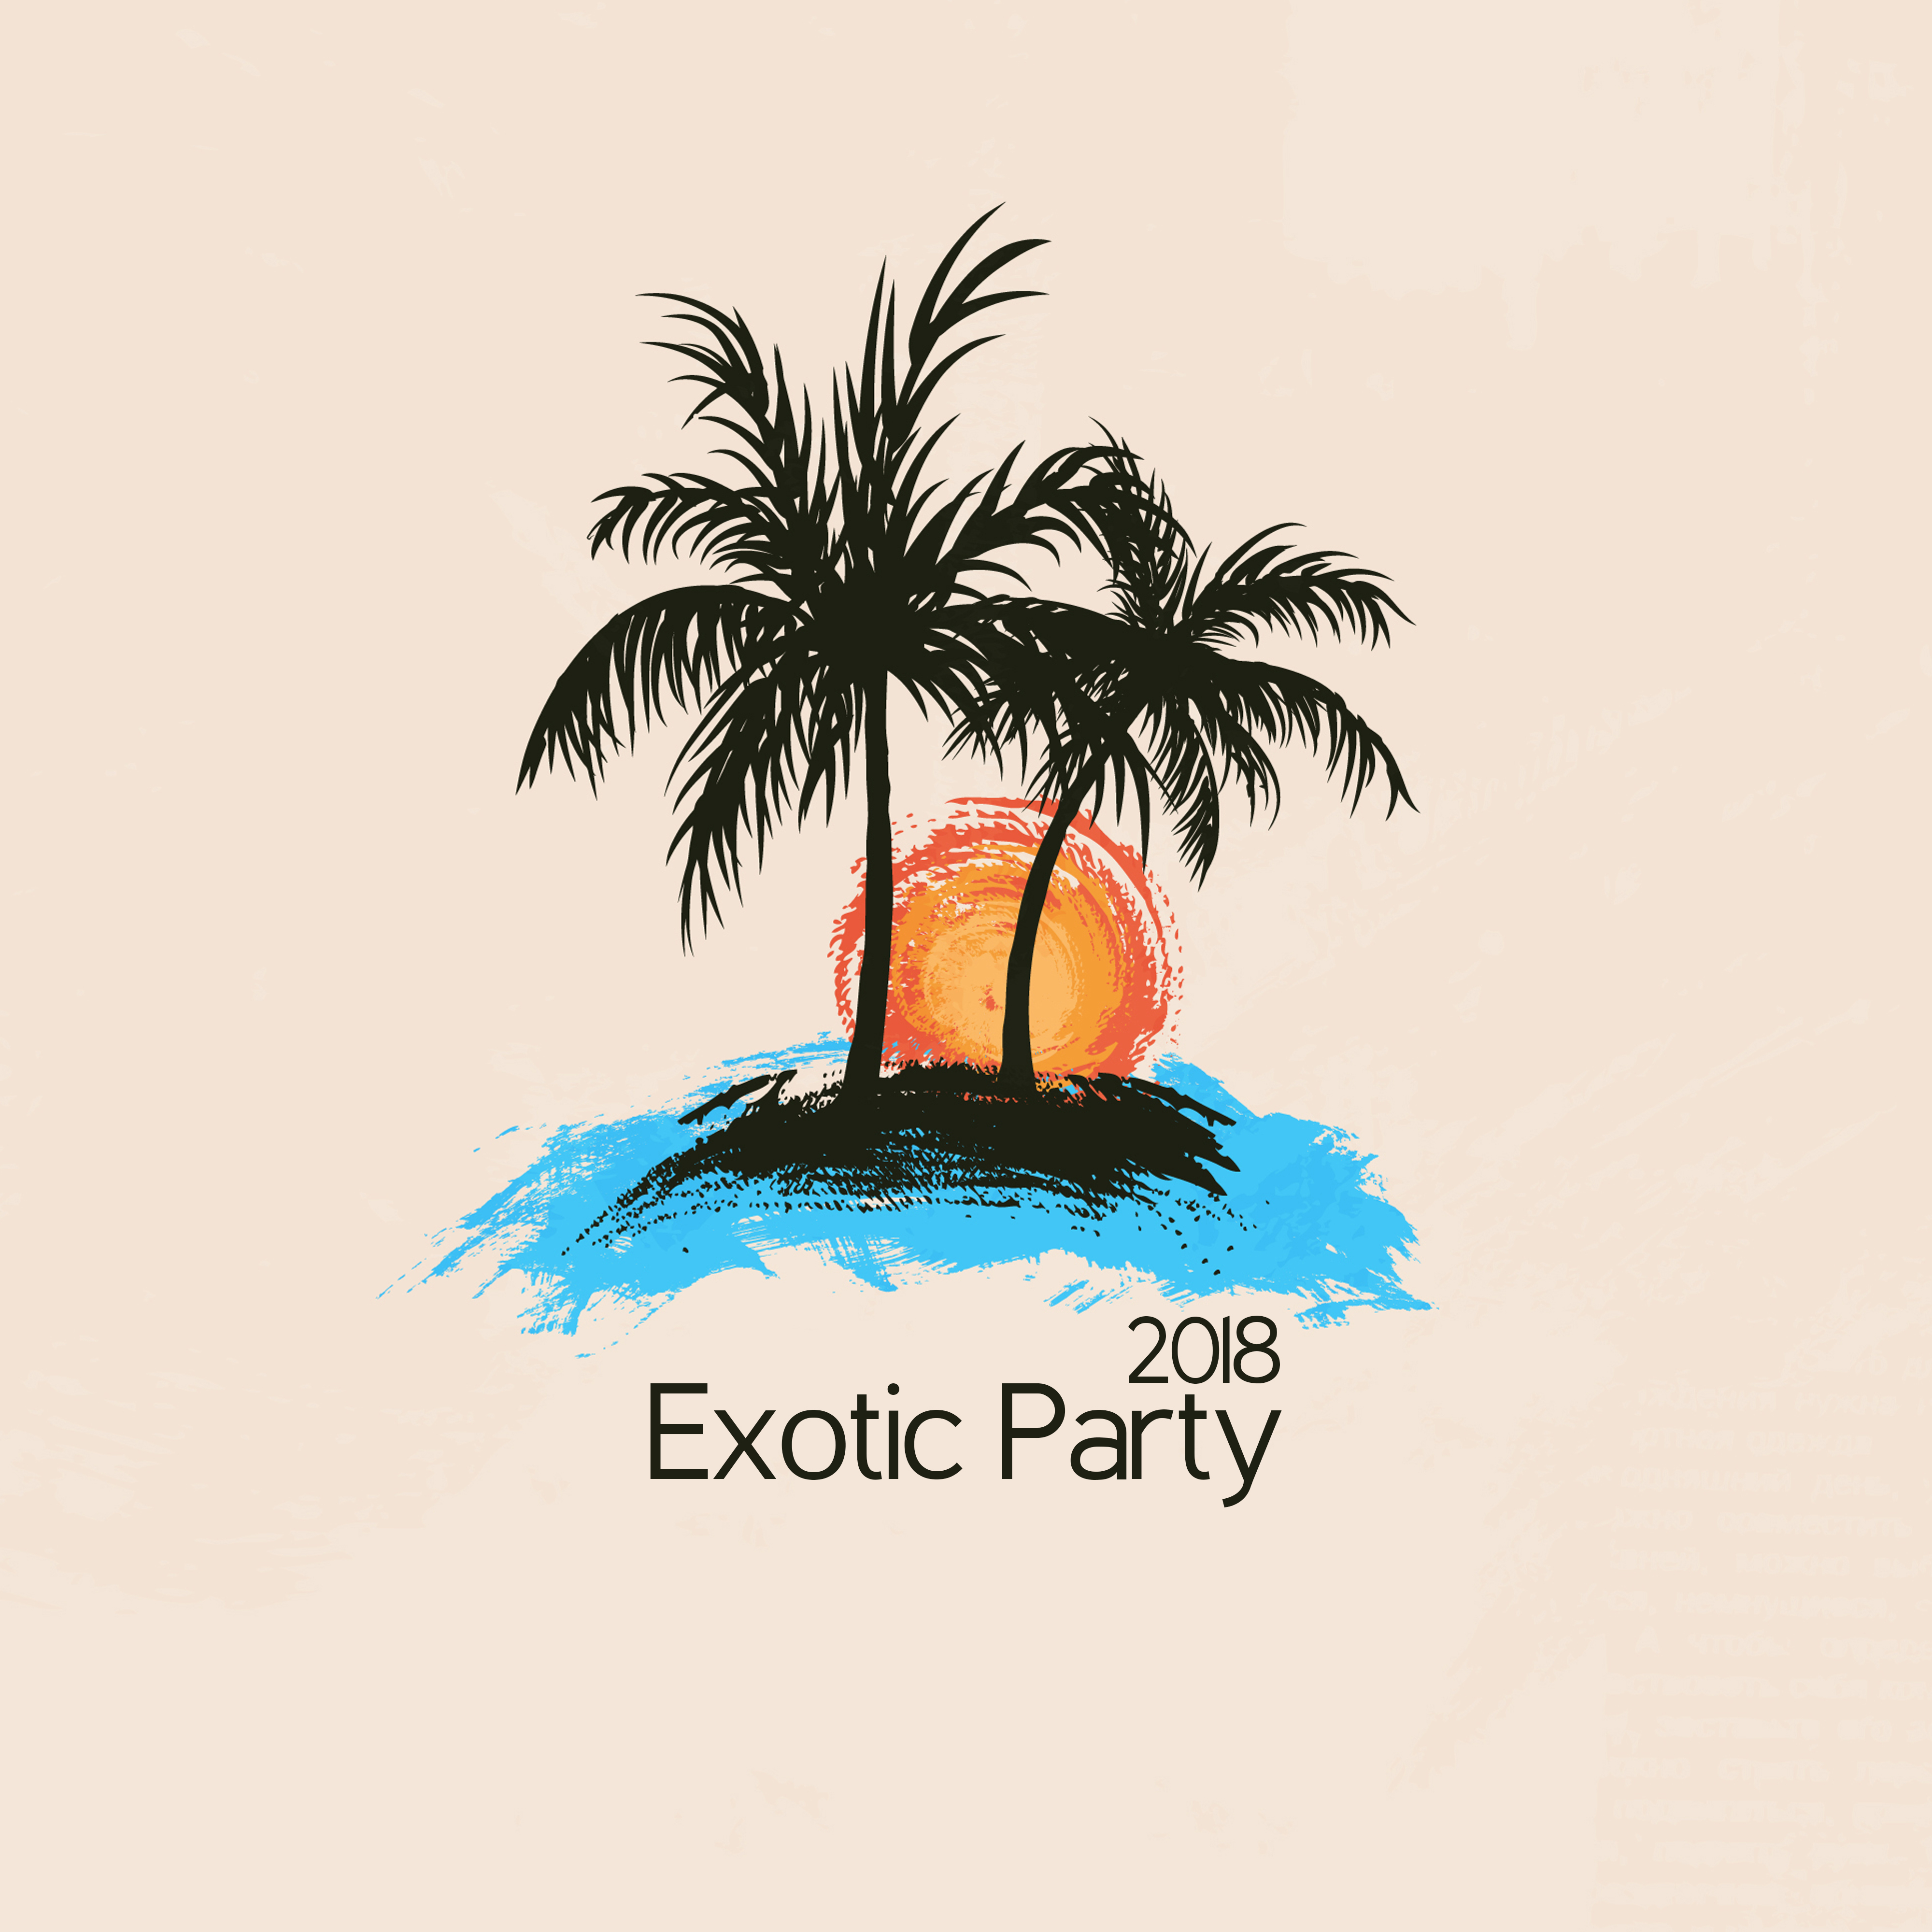 Exotic Party 2018